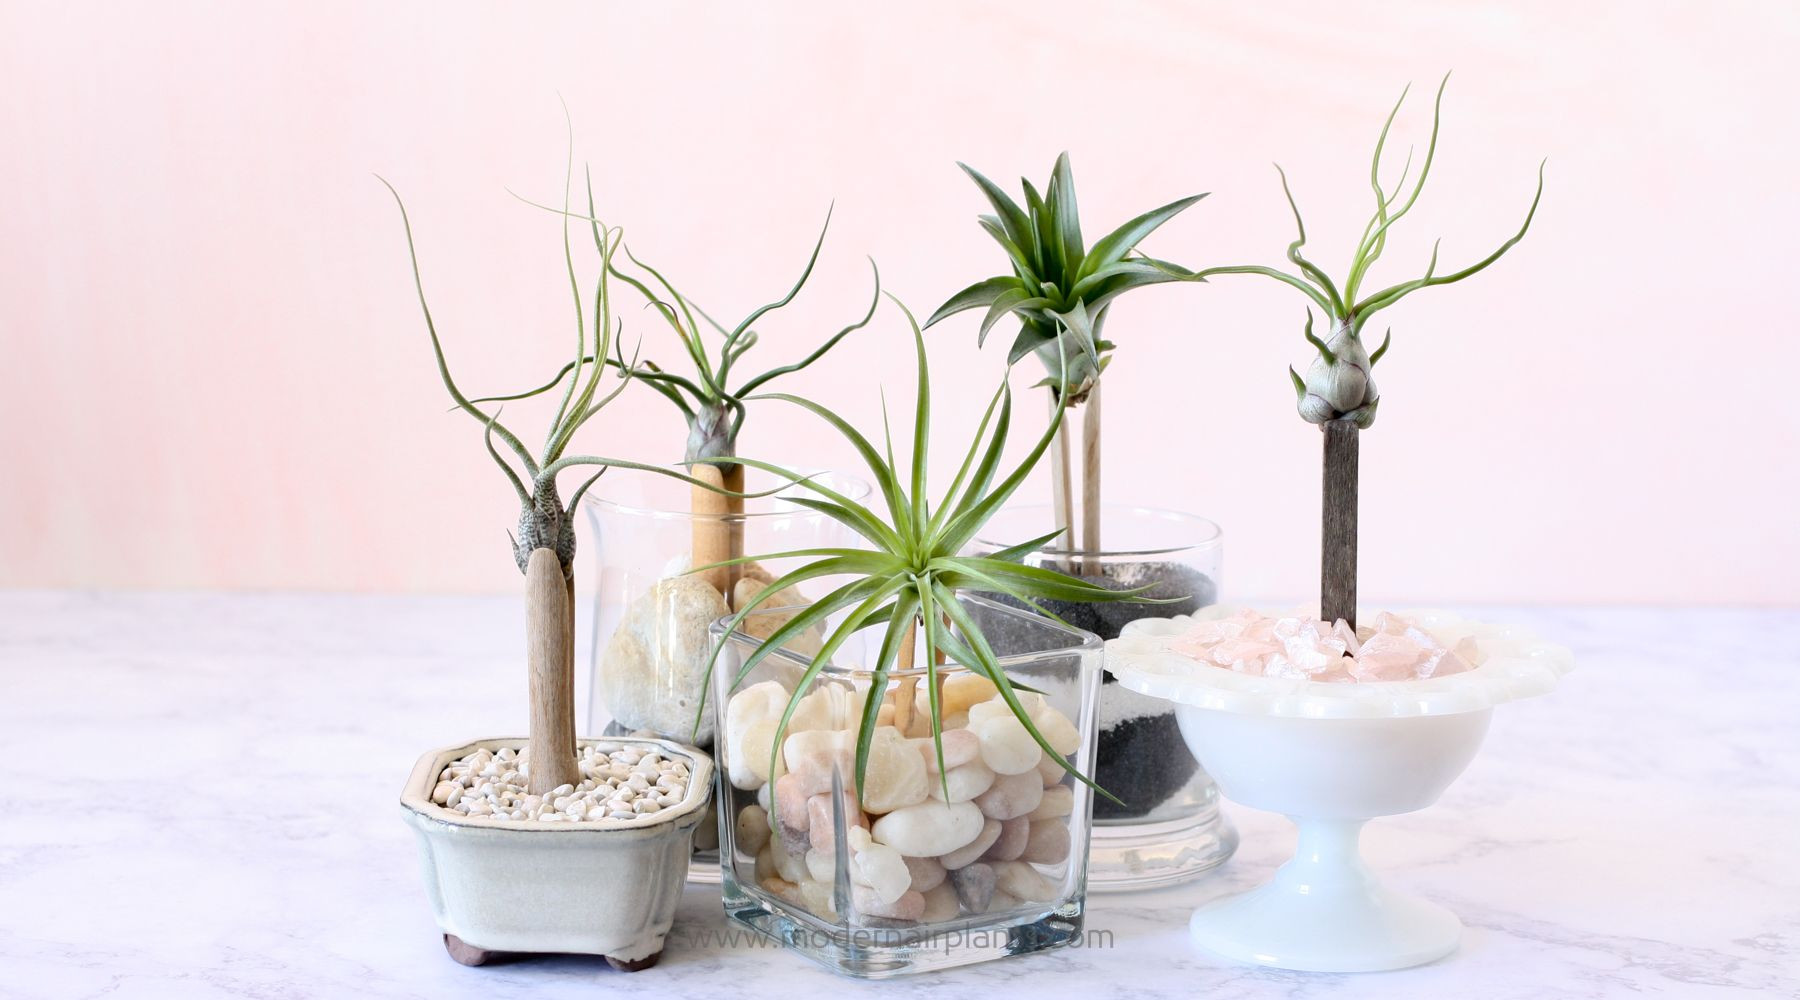 30 Ideal Air Plant Vase Ideas 2024 free download air plant vase ideas of air plants and clothespins several years ago i was at a boutique intended for air plants and clothespins several years ago i was at a boutique and purchased some vint